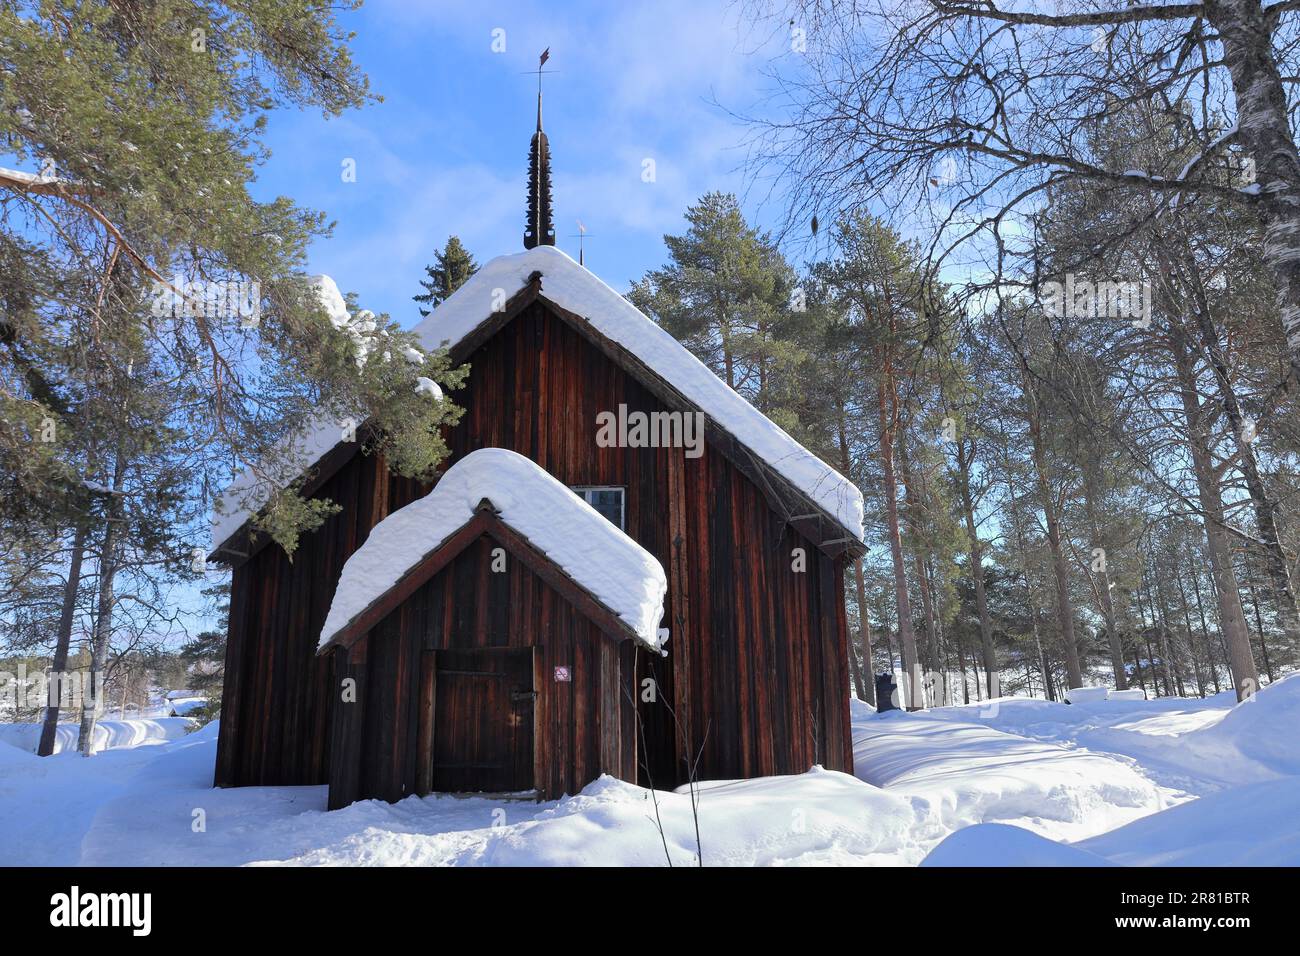 Sodankylä Old Church, Finland pictured in winter snow in woodland on the banks of the River Kitinen, it is one of Finland’s oldest churches Stock Photo